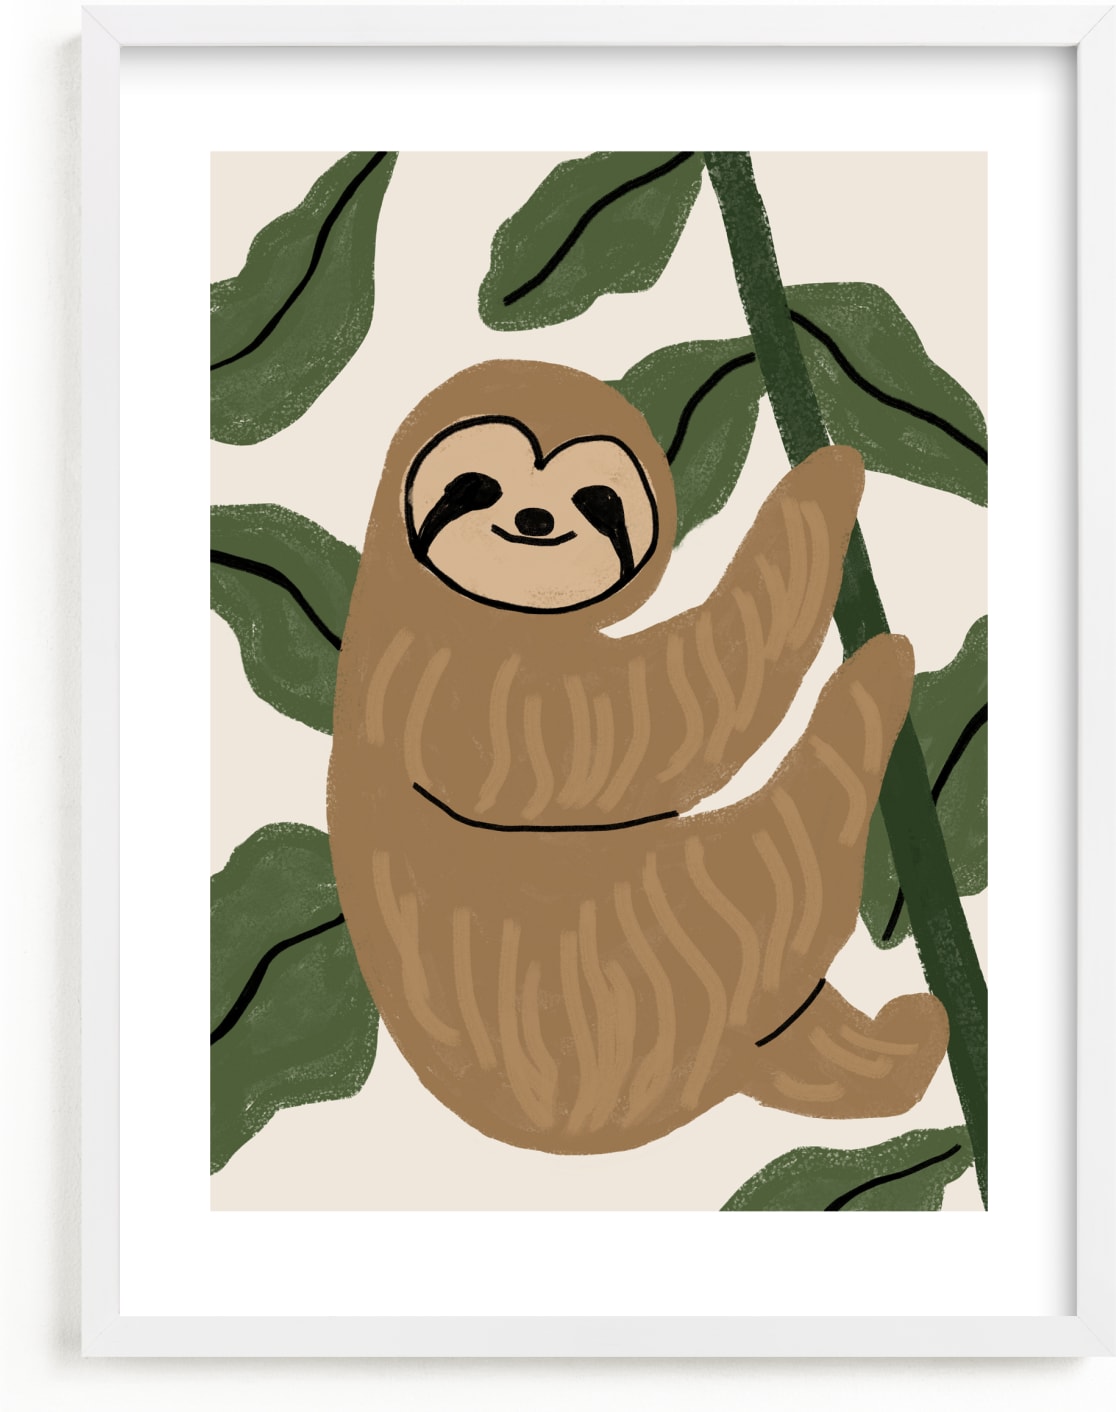 This is a brown art by Cass Loh called Baby sloth.